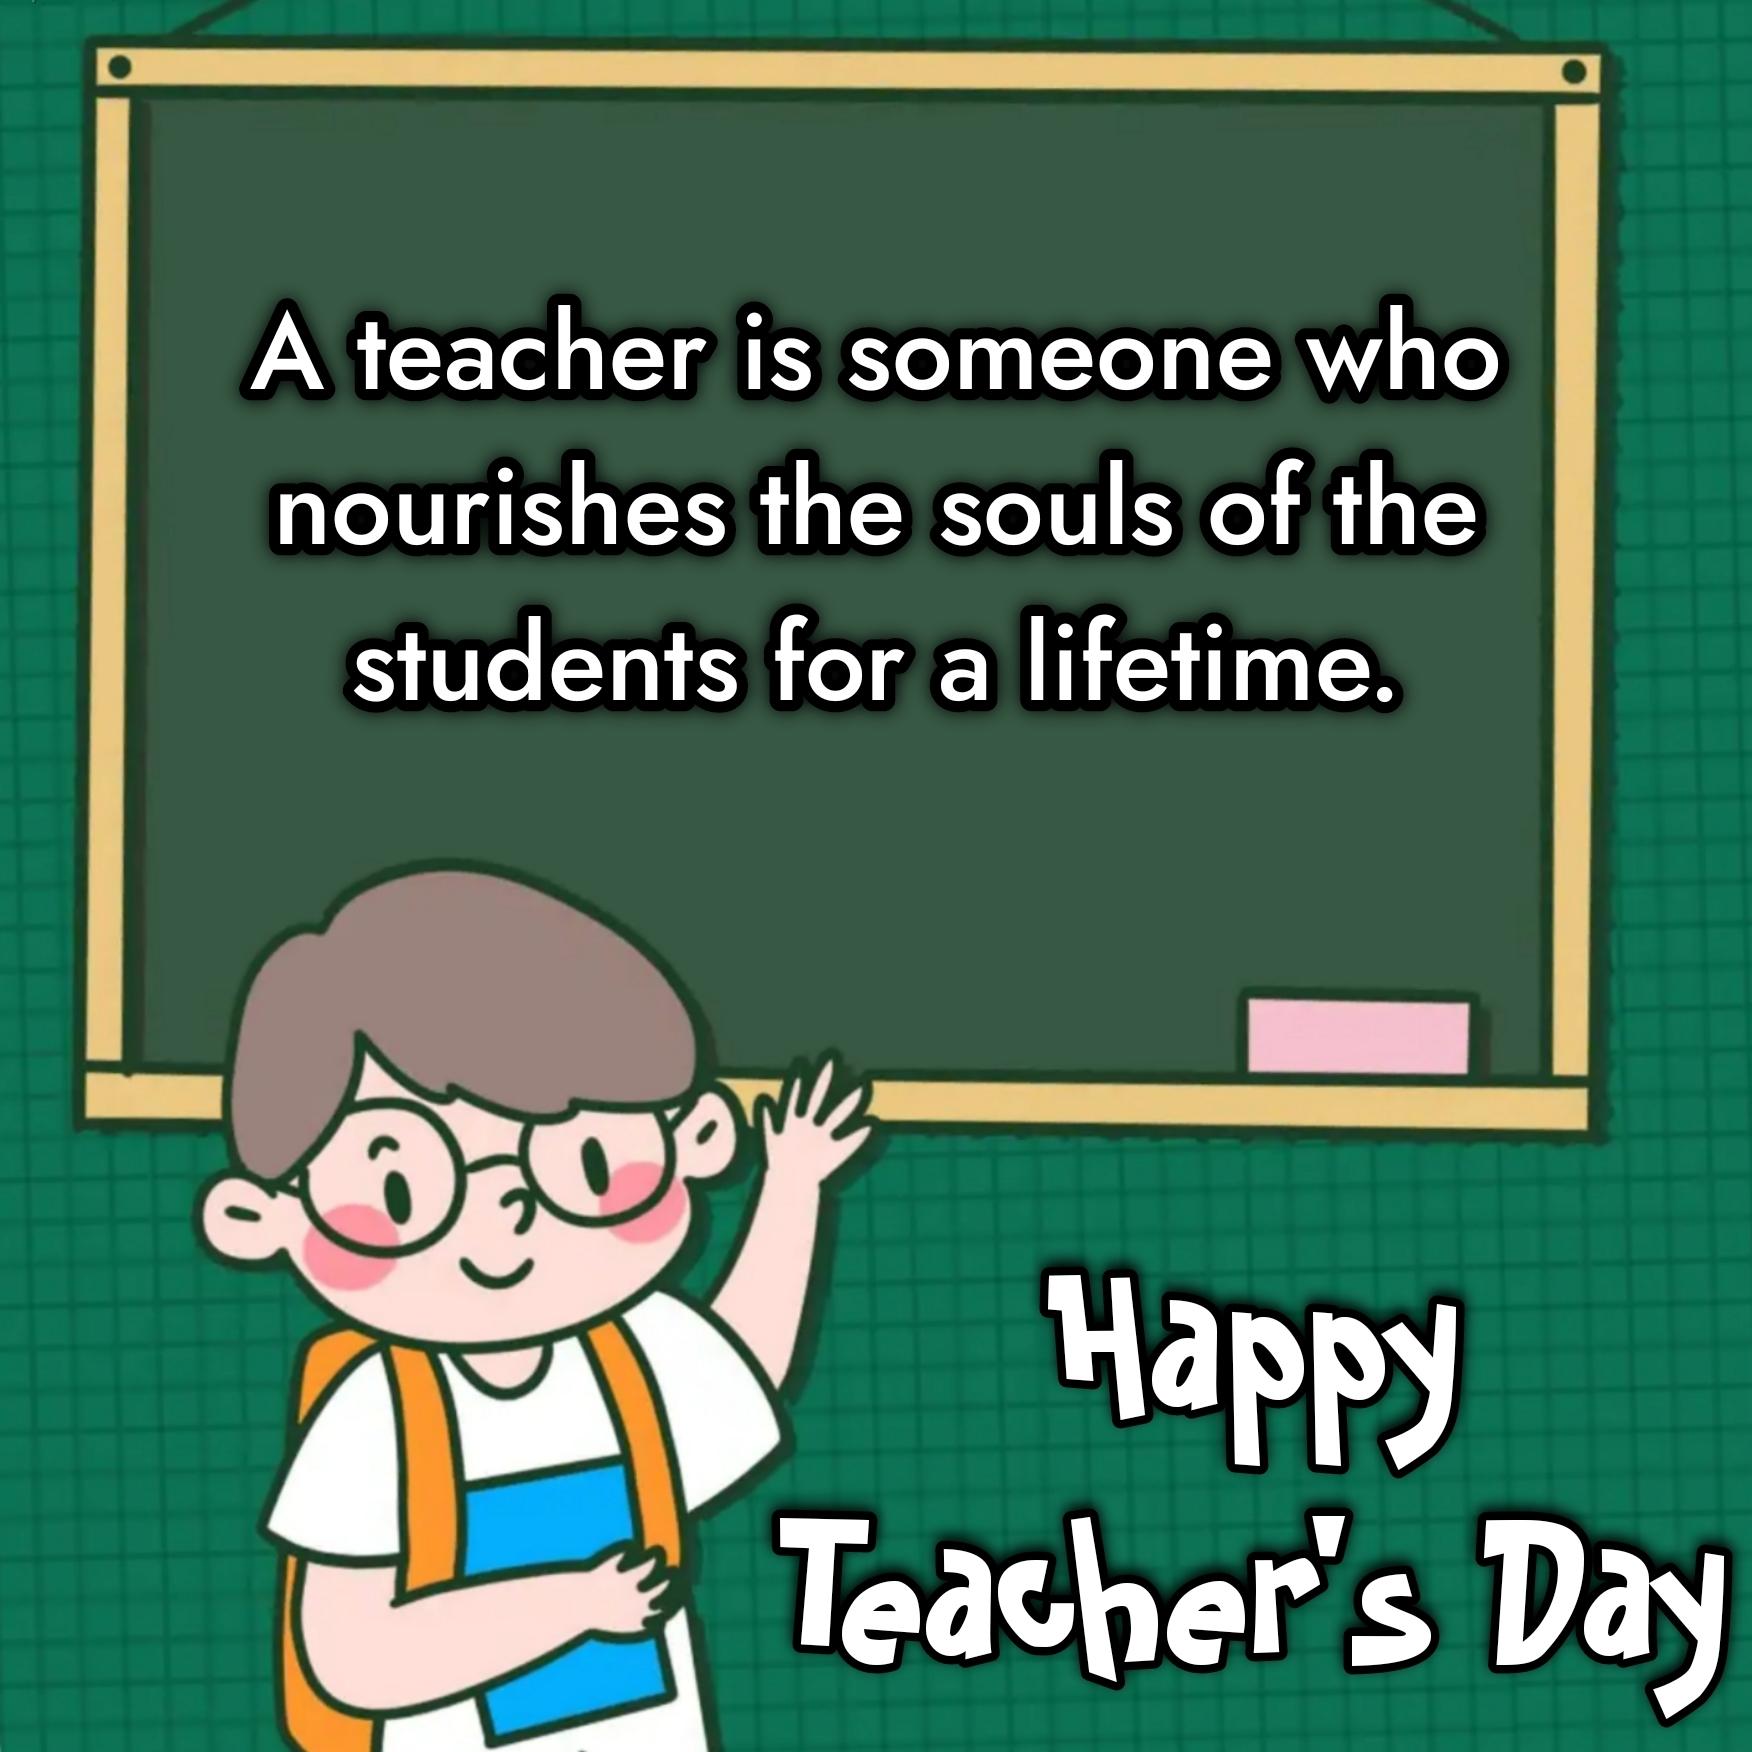 A teacher is someone who nourishes the souls of the students